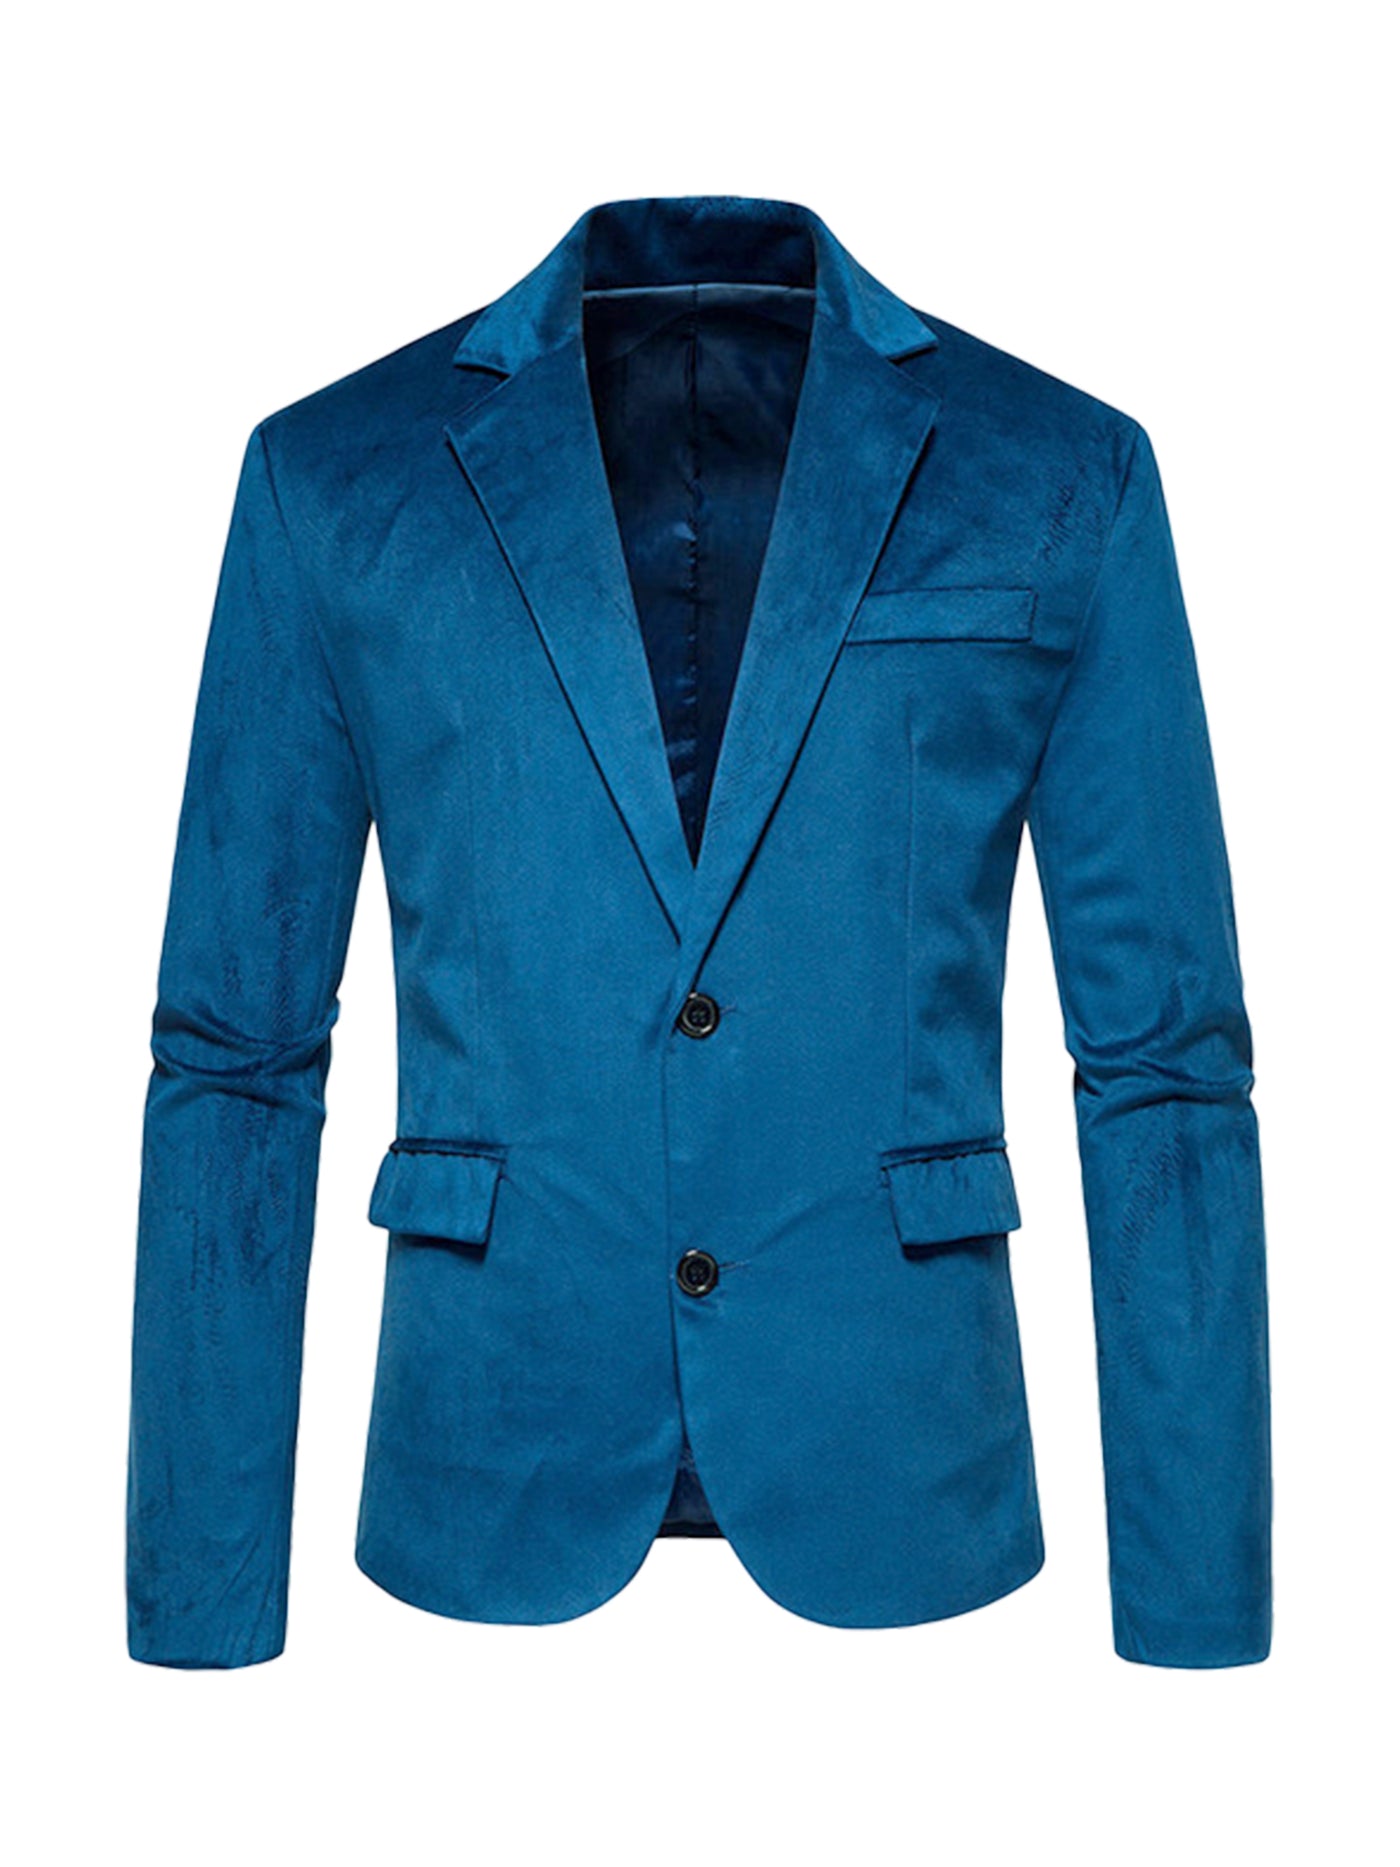 Bublédon Suede Blazers for Men's Slim Fit Solid Color Two Button Formal Sports Coats